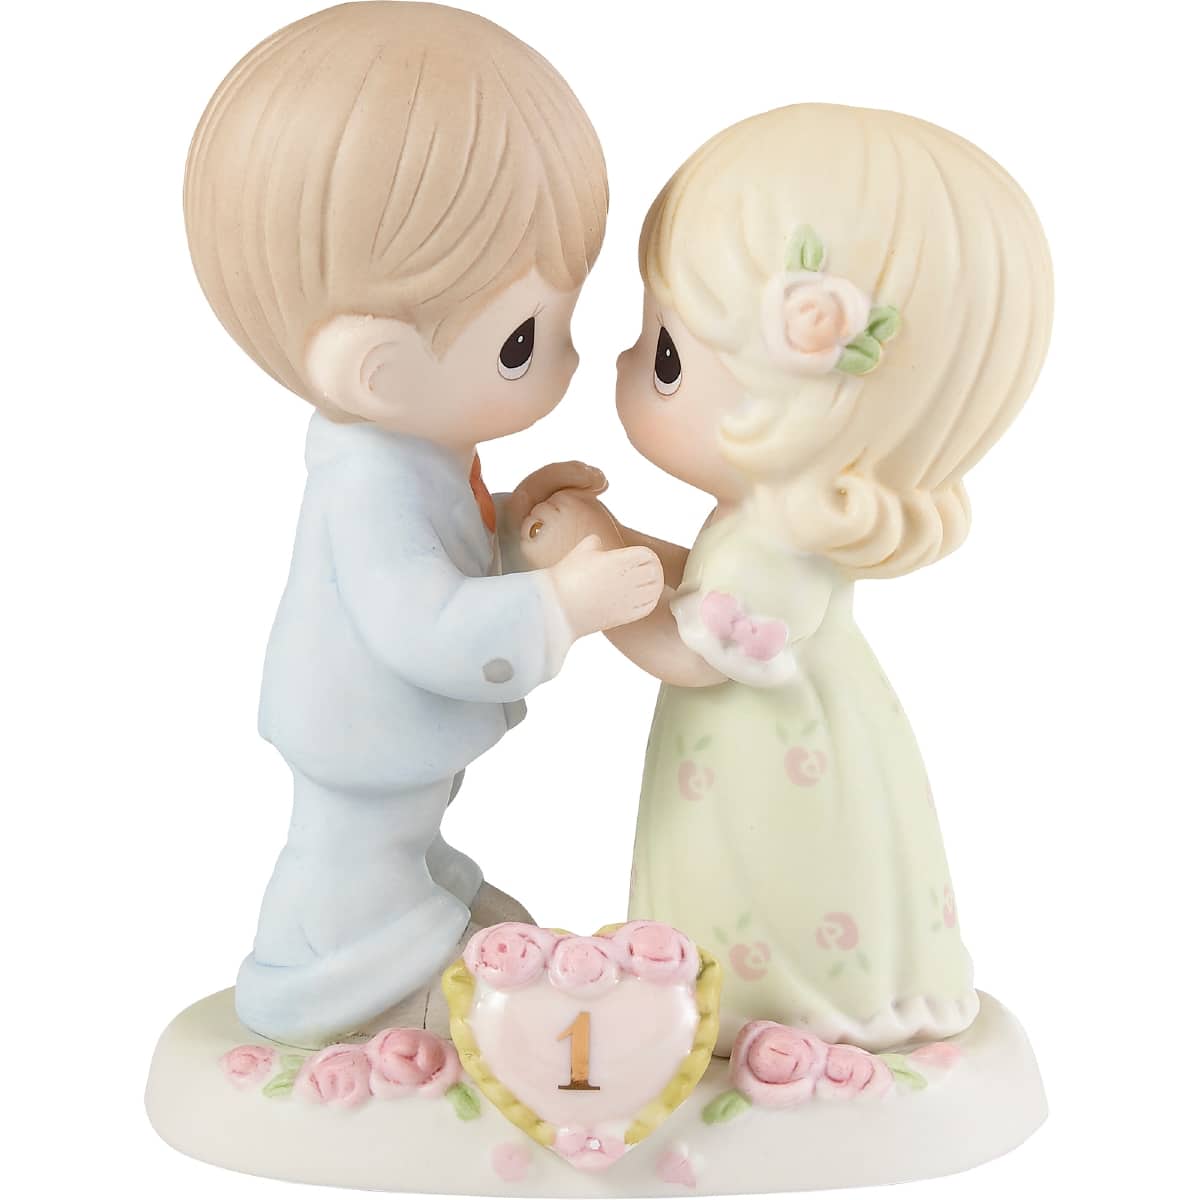 Precious Moments A Whole Year Filled With Special Moments 1st Anniversary Bisque Porcelain Figurine